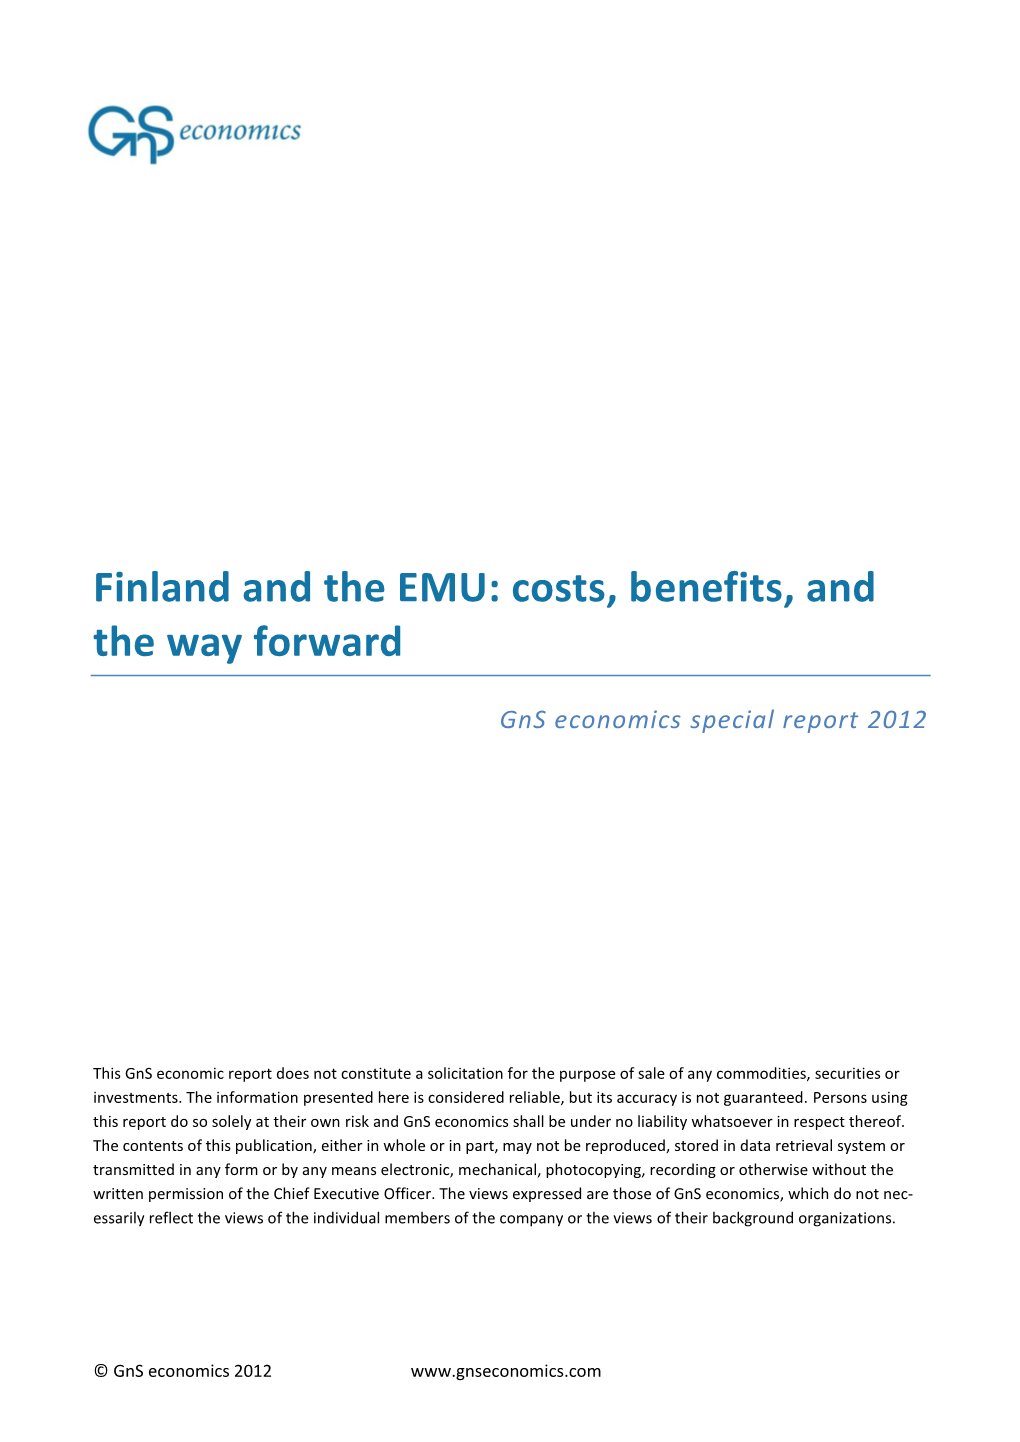 Finland and the EMU: Costs, Benefits, and the Way Forward